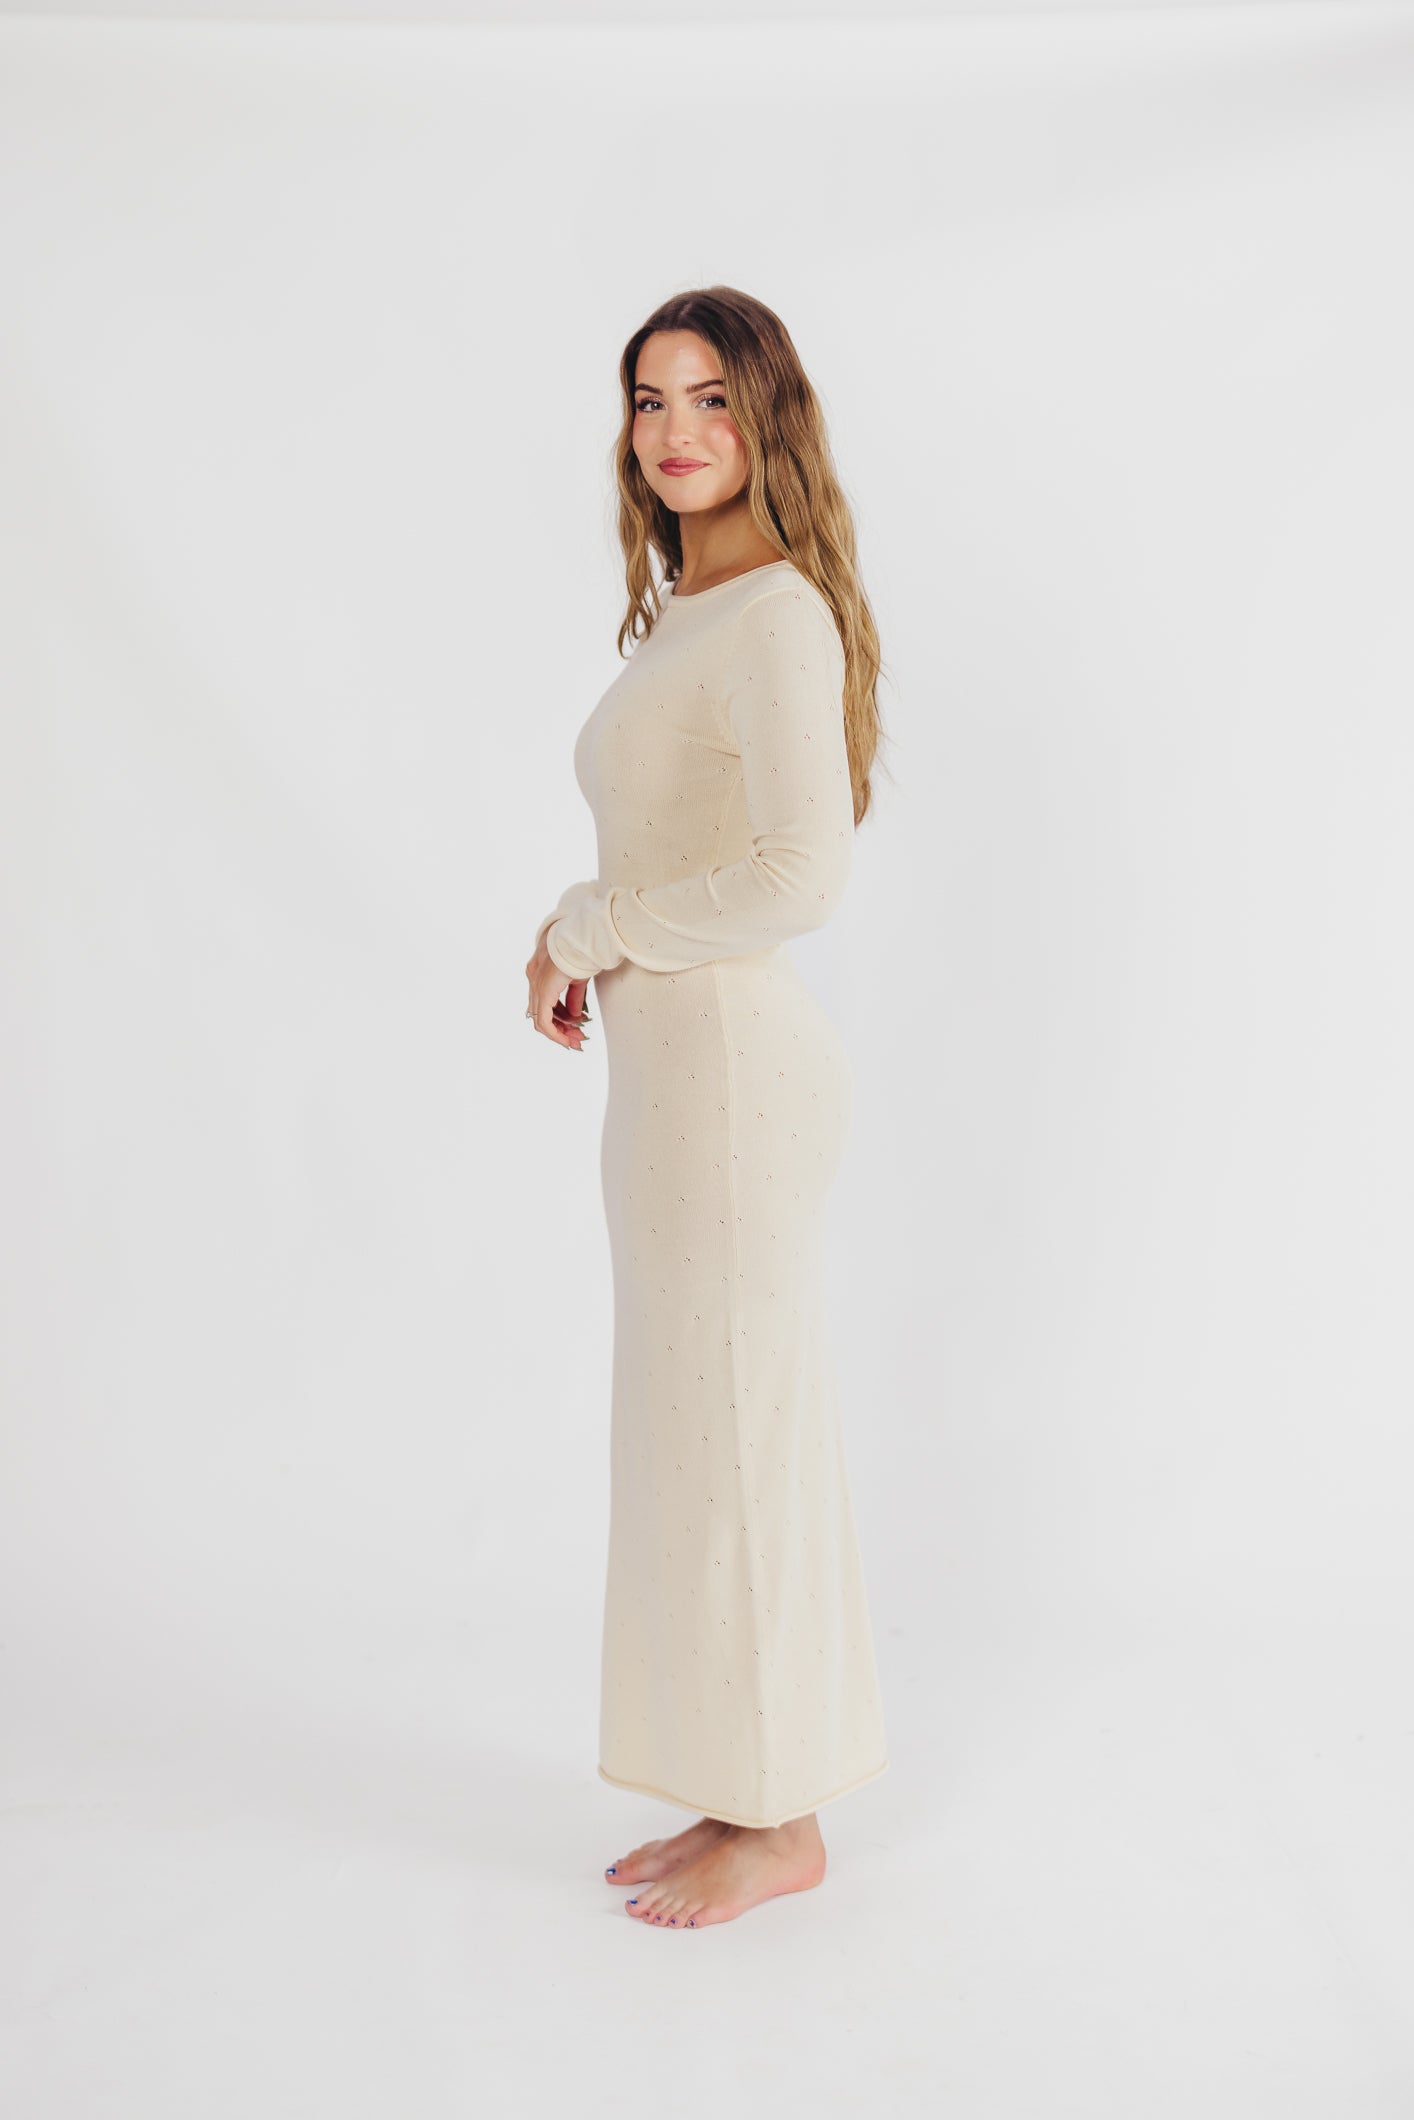 Maddy Pointelle Knit Maxi Dress in Butter